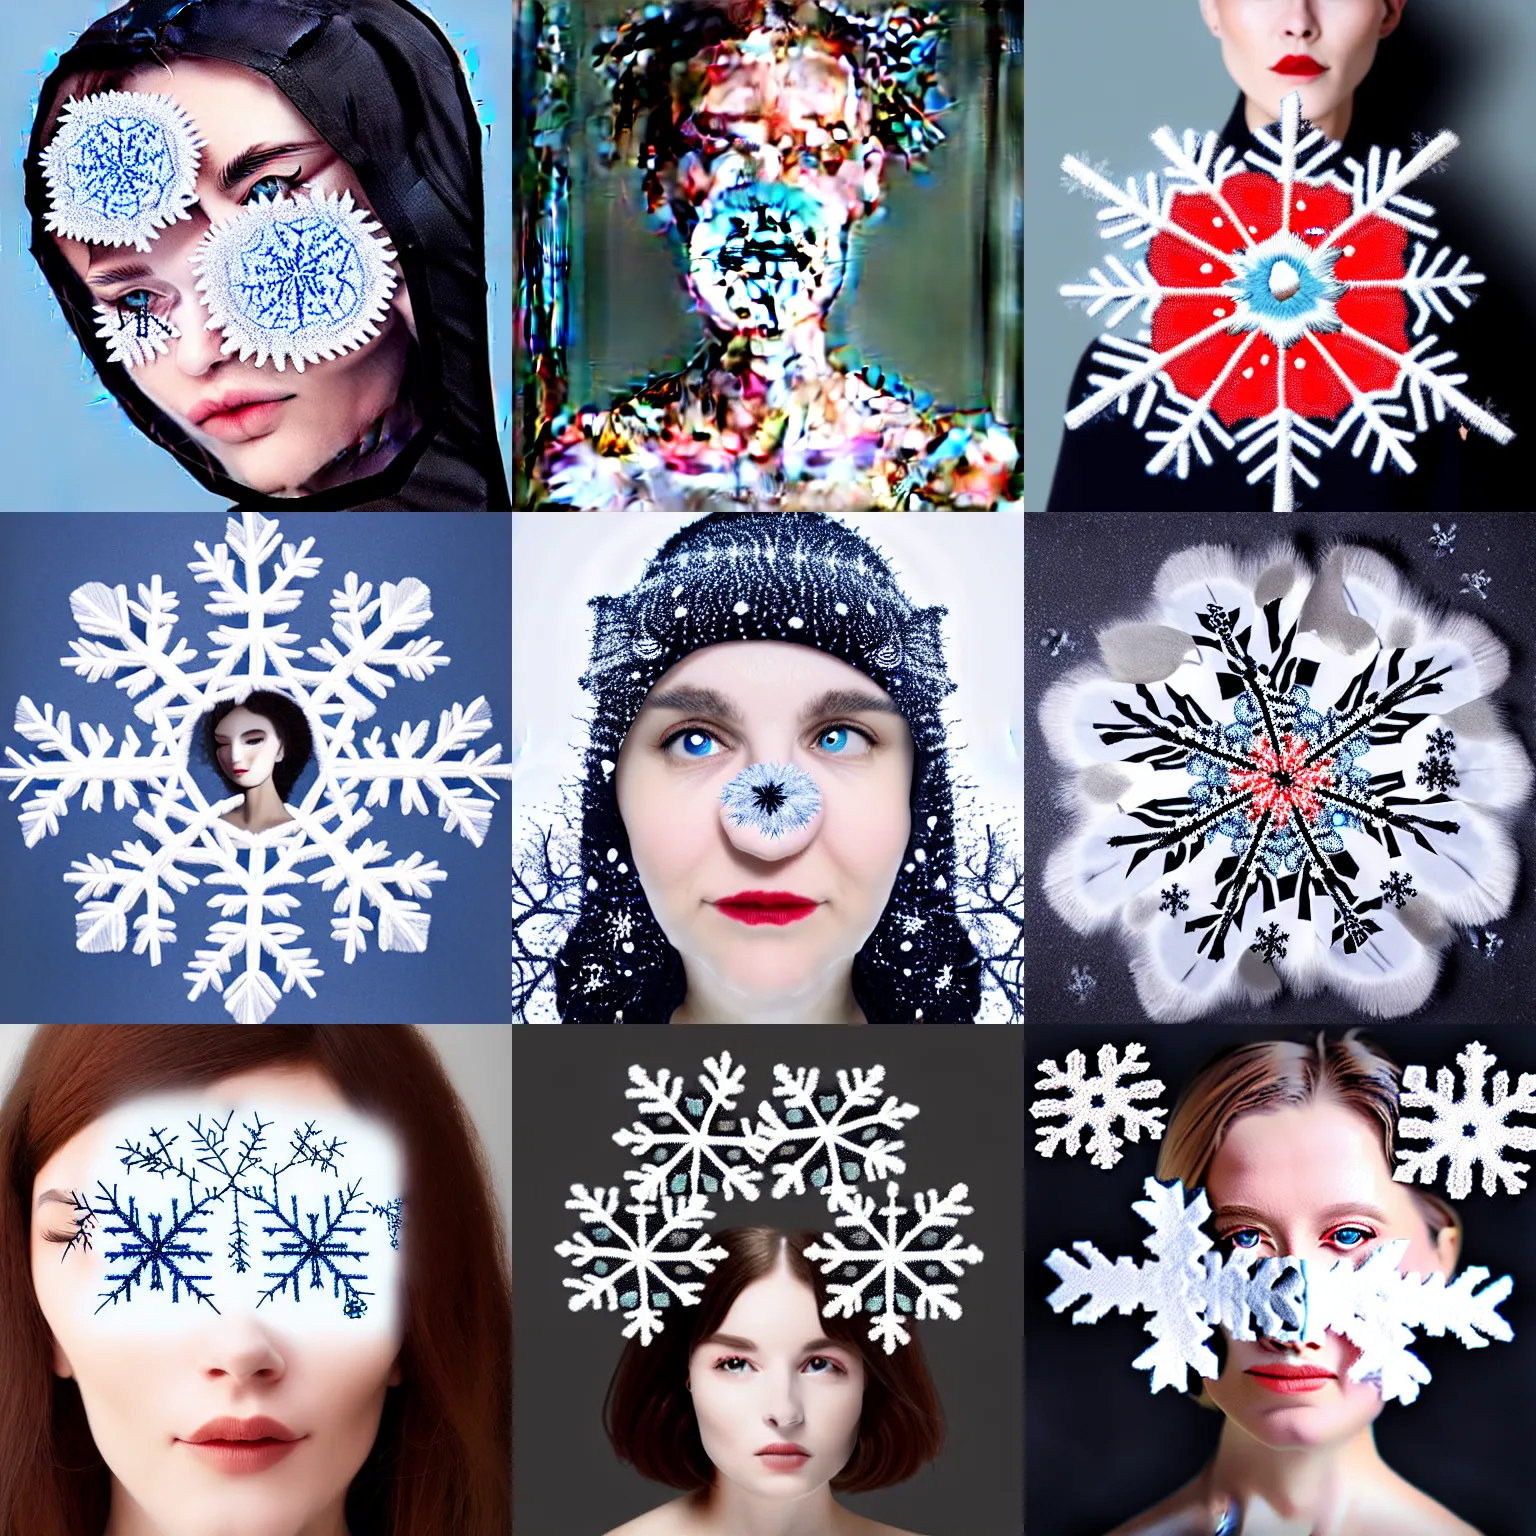 Prompt: surreal photography silk snowflake with embroidered face